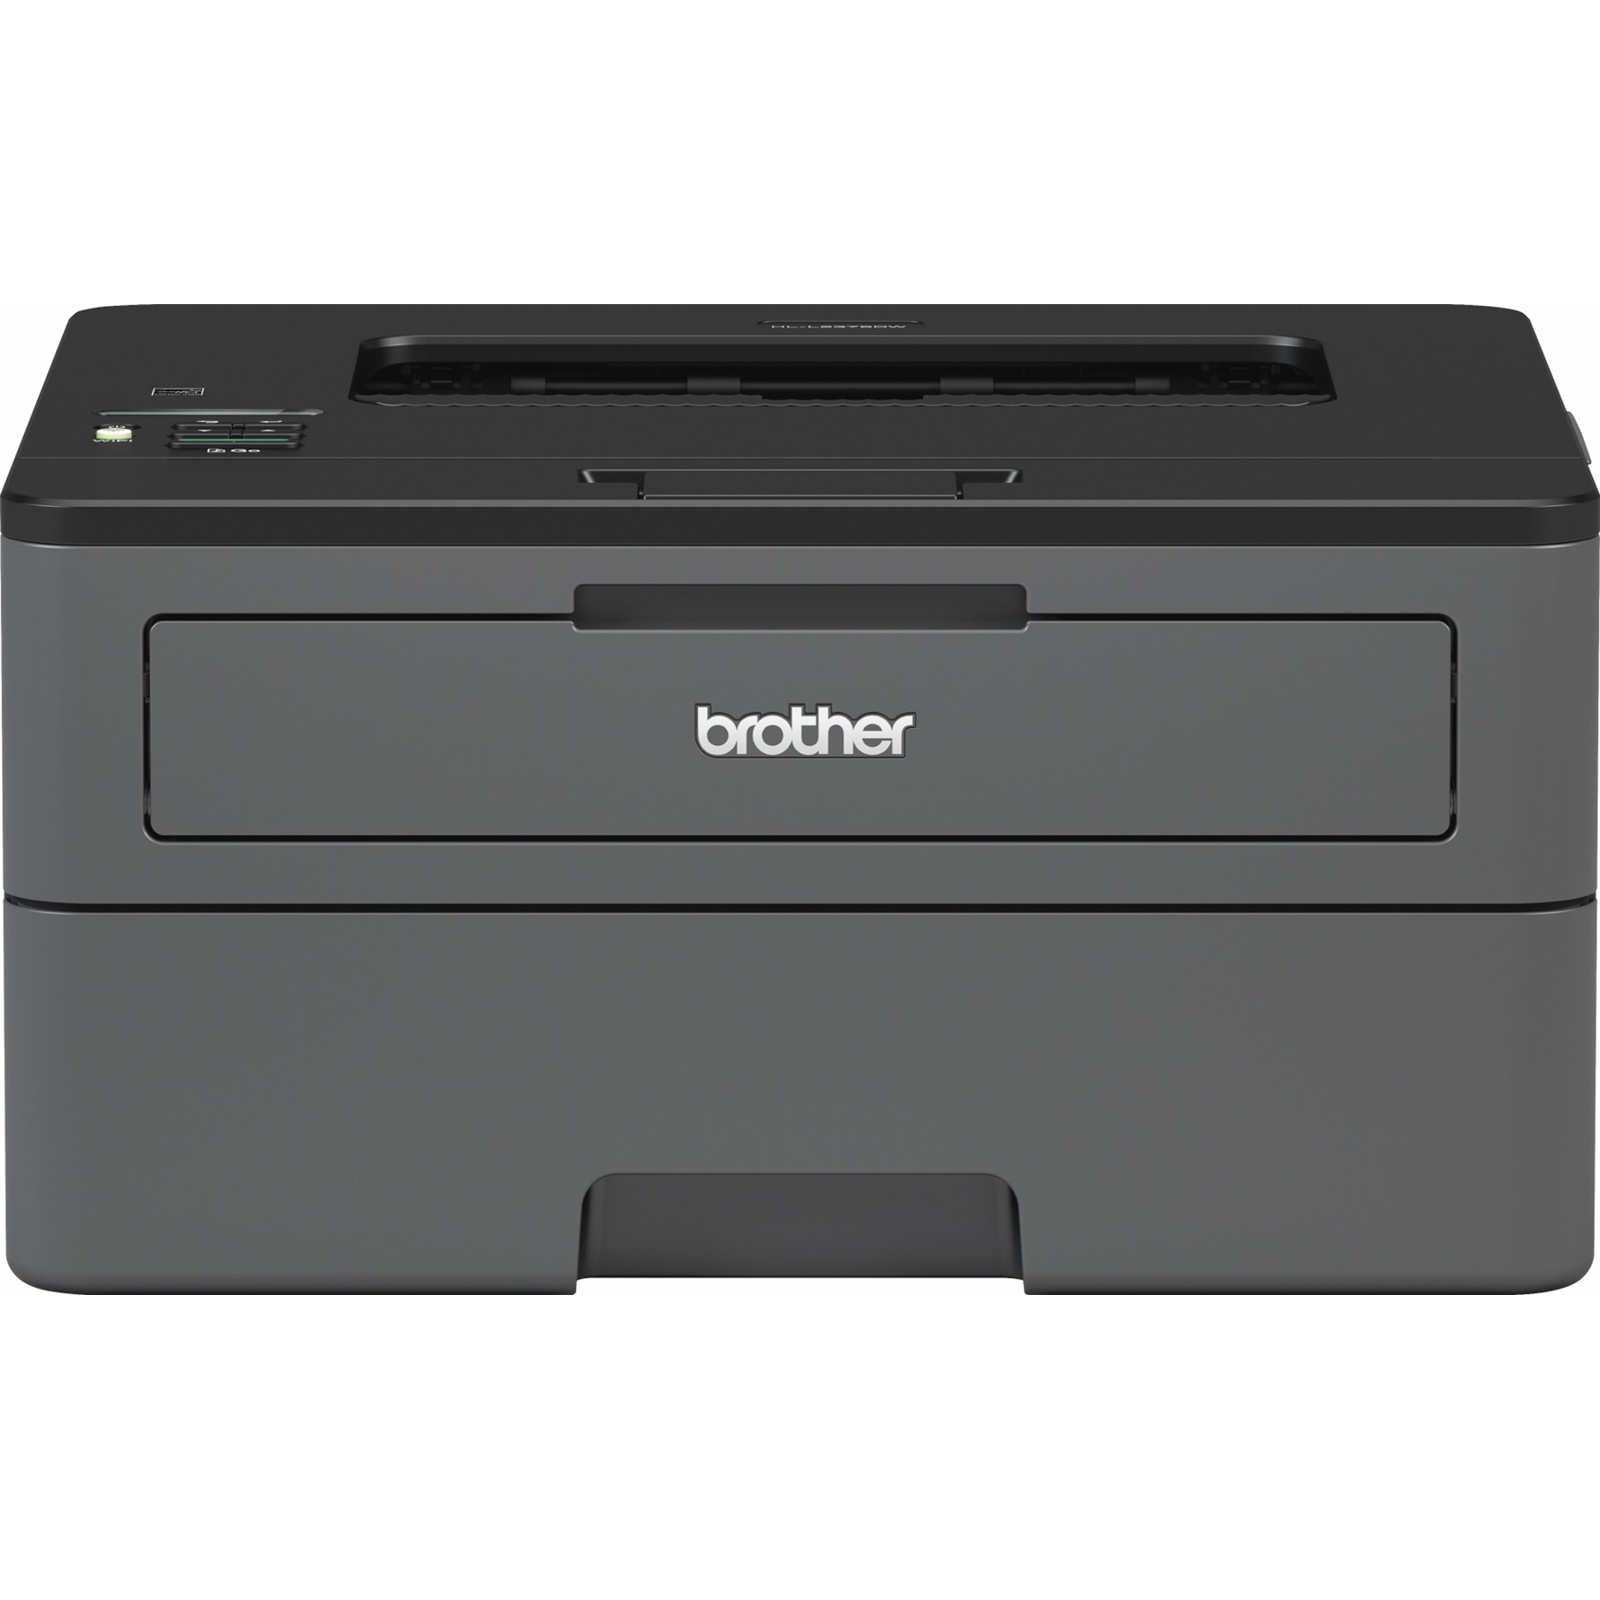 Kartofler mulighed om forladelse Buy the Brother HLL2375DW Mono Laser Printer Black AirPrint/Wifi Direct  Print... ( HLL2375dw ) online - PBTech.com/pacific